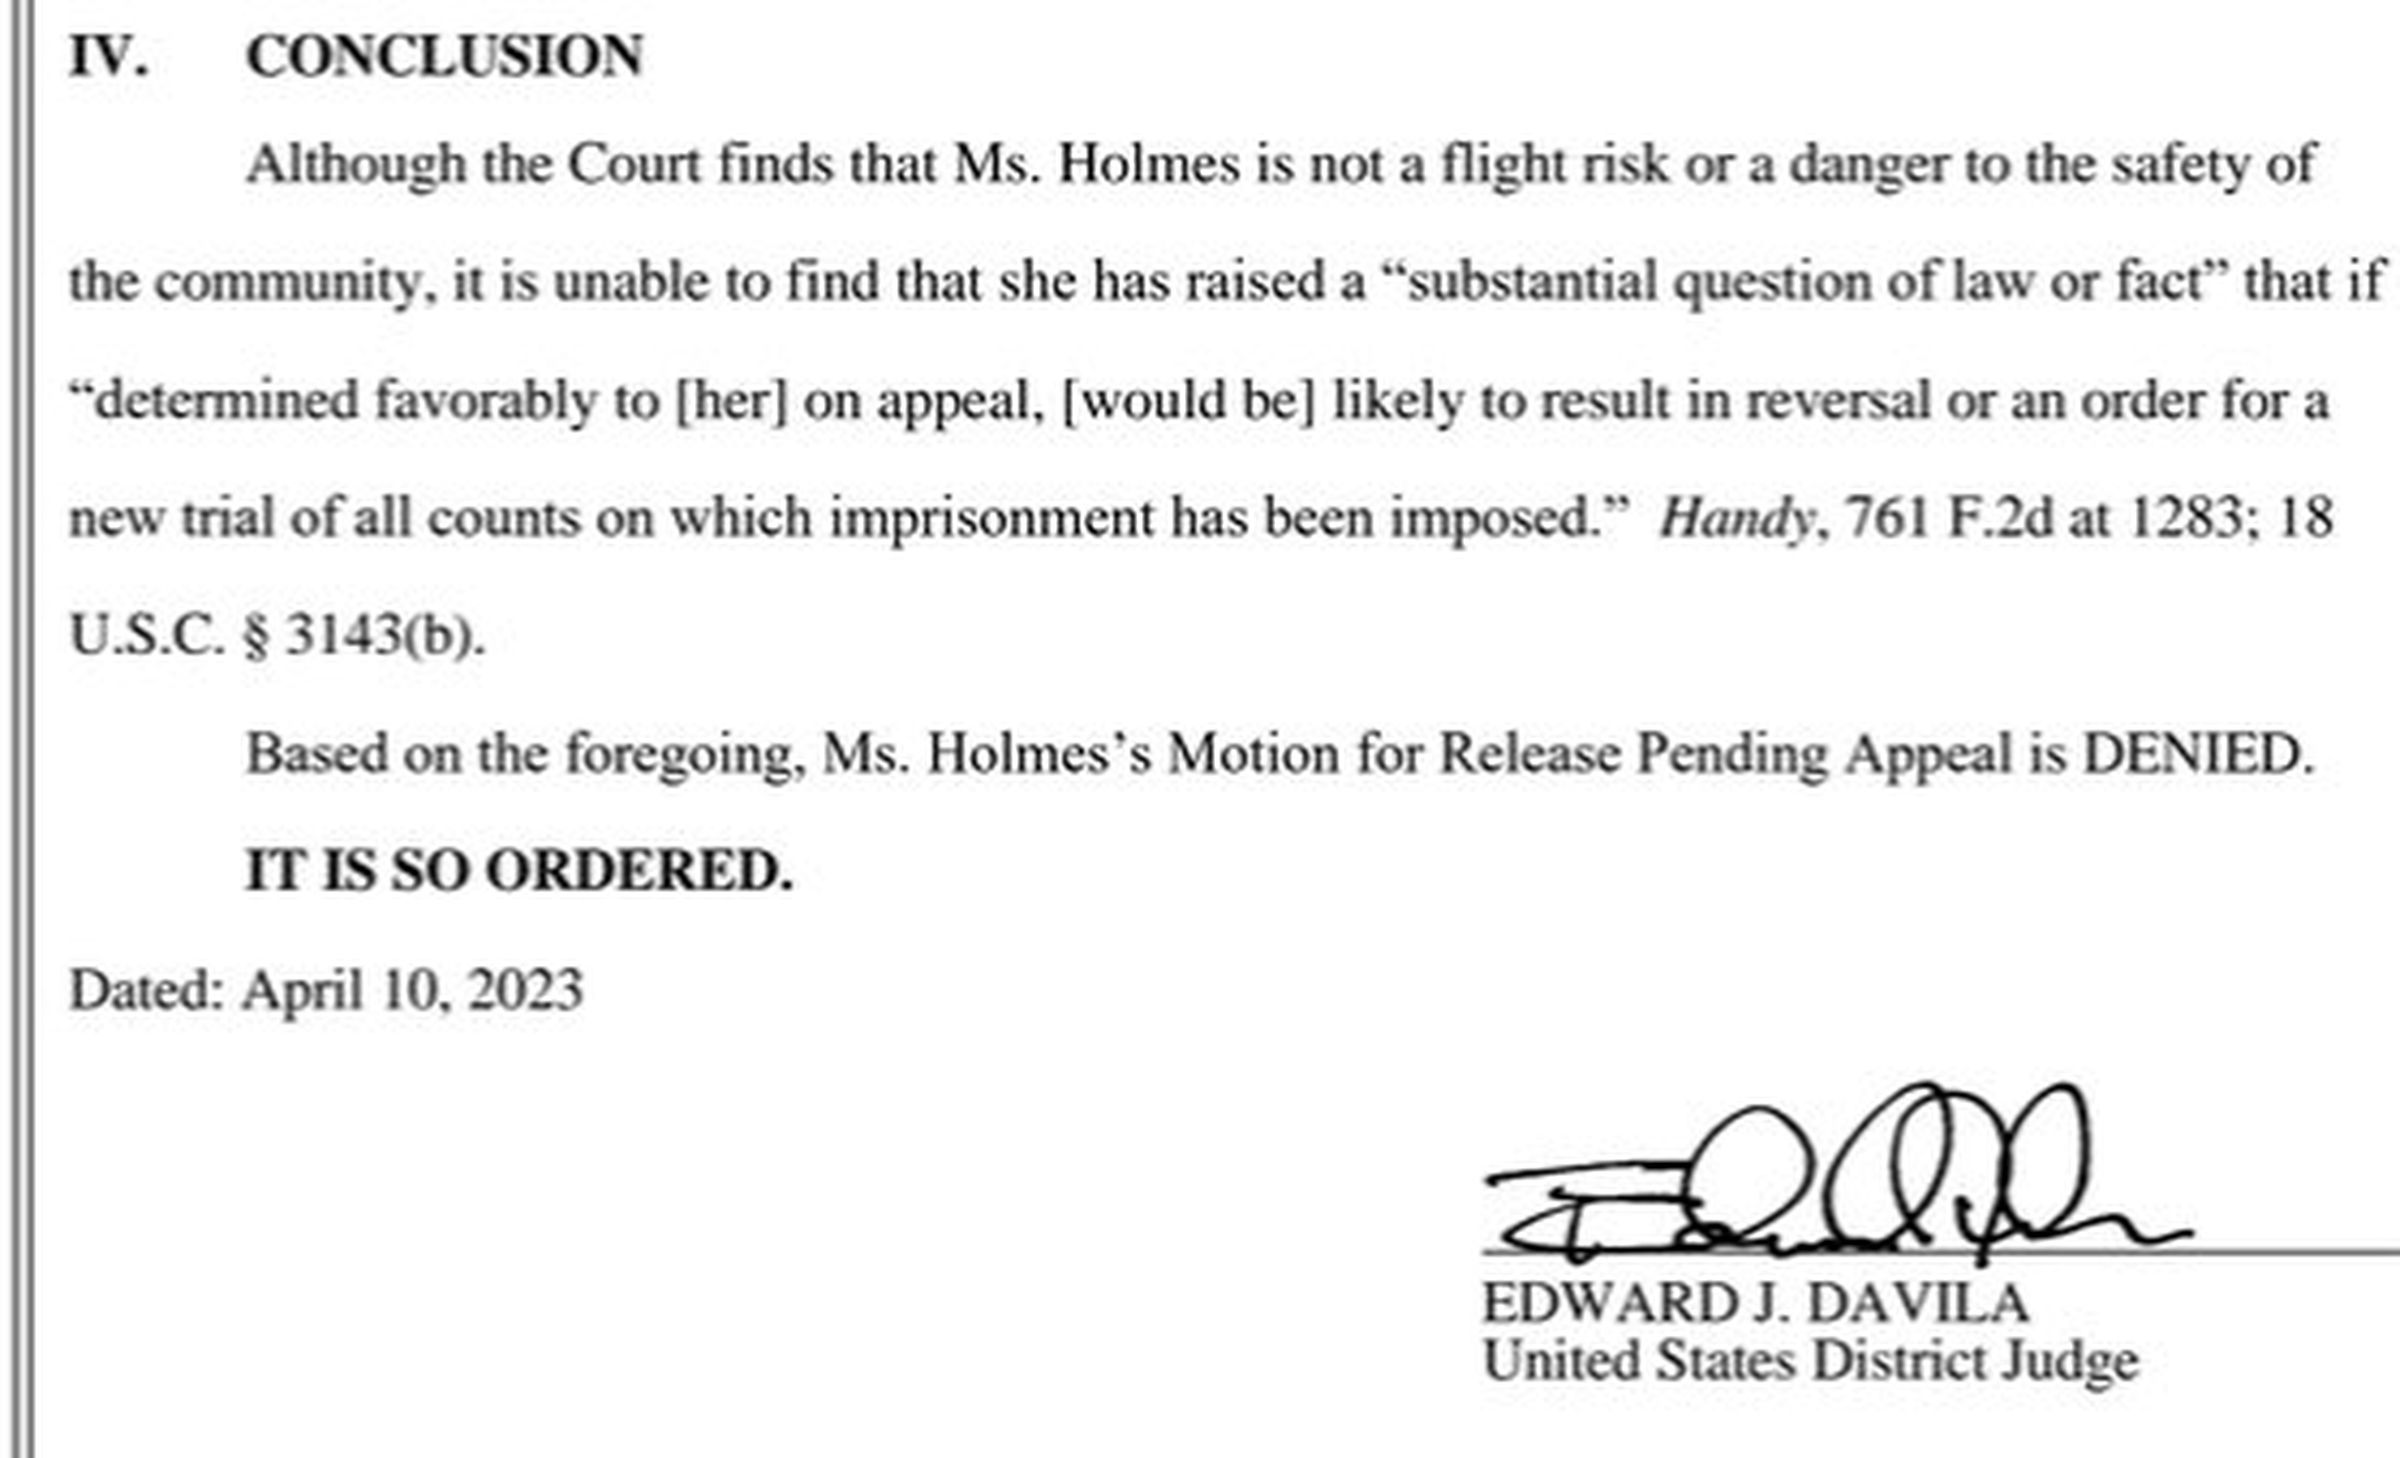 Although the Court finds that Ms. Holmes is not a flight risk or a danger to the safety of the community, it is unable to find that she has raised a “substantial question of law or fact” that if “determined favorably to her on appeal would be likely to result in a reversal or an order for a new trial.”